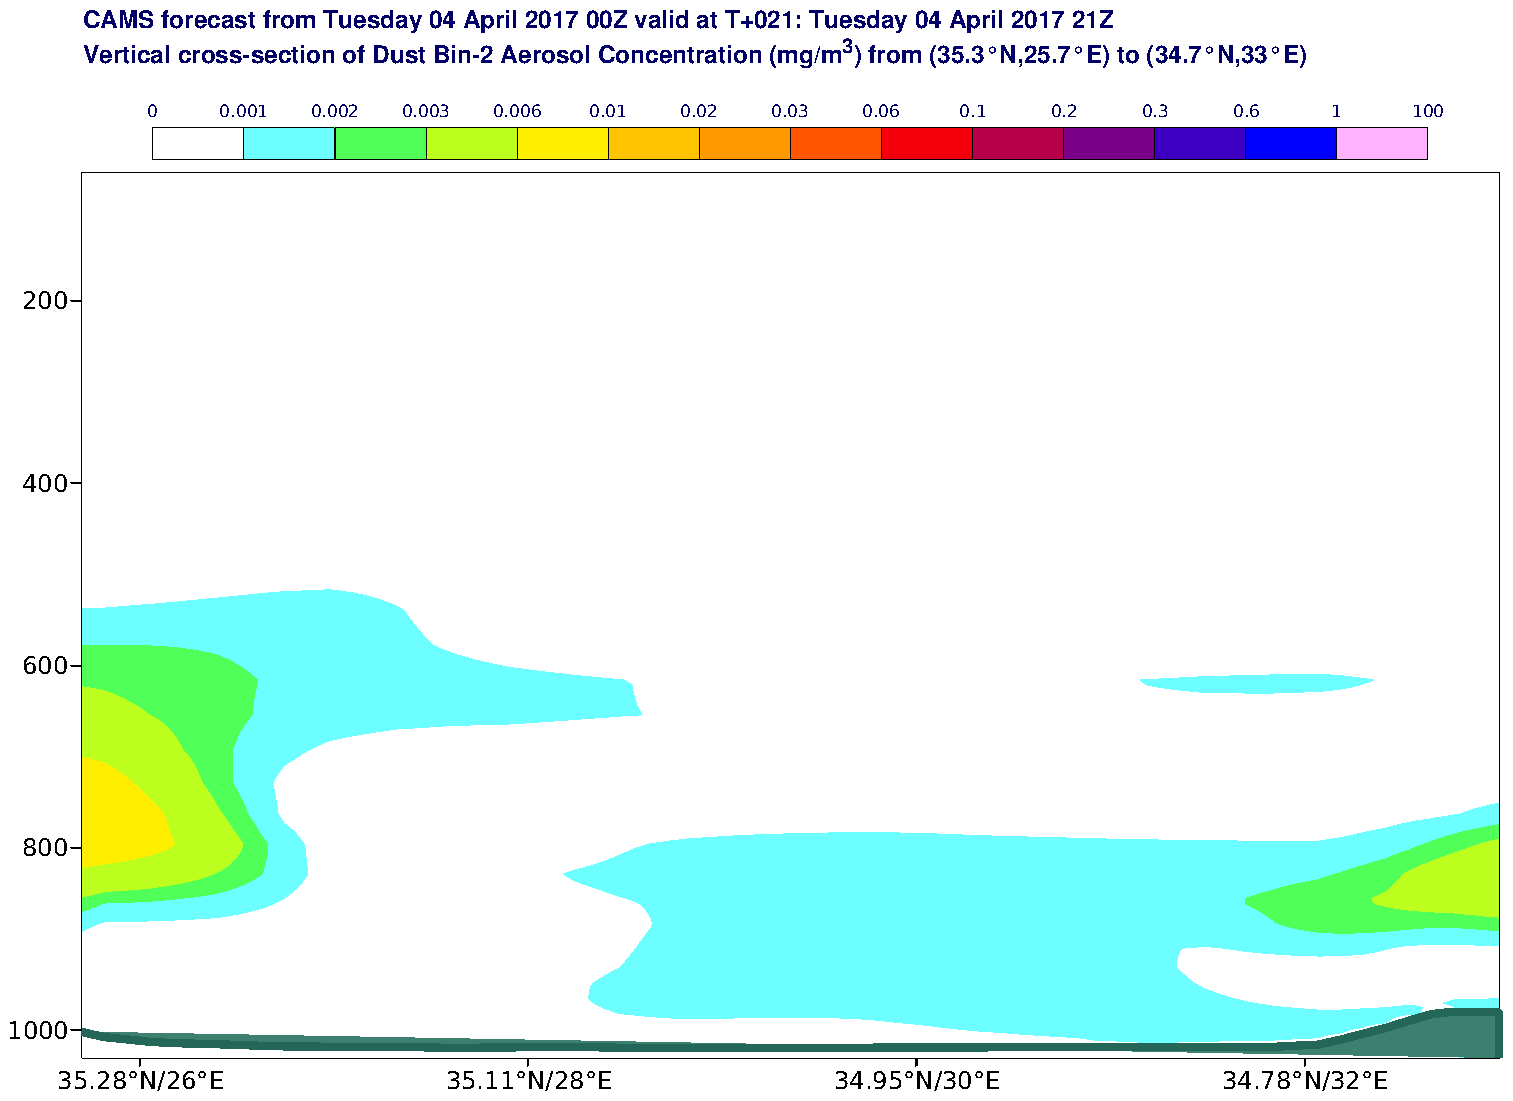 Vertical cross-section of Dust Bin-2 Aerosol Concentration (mg/m3) valid at T21 - 2017-04-04 21:00